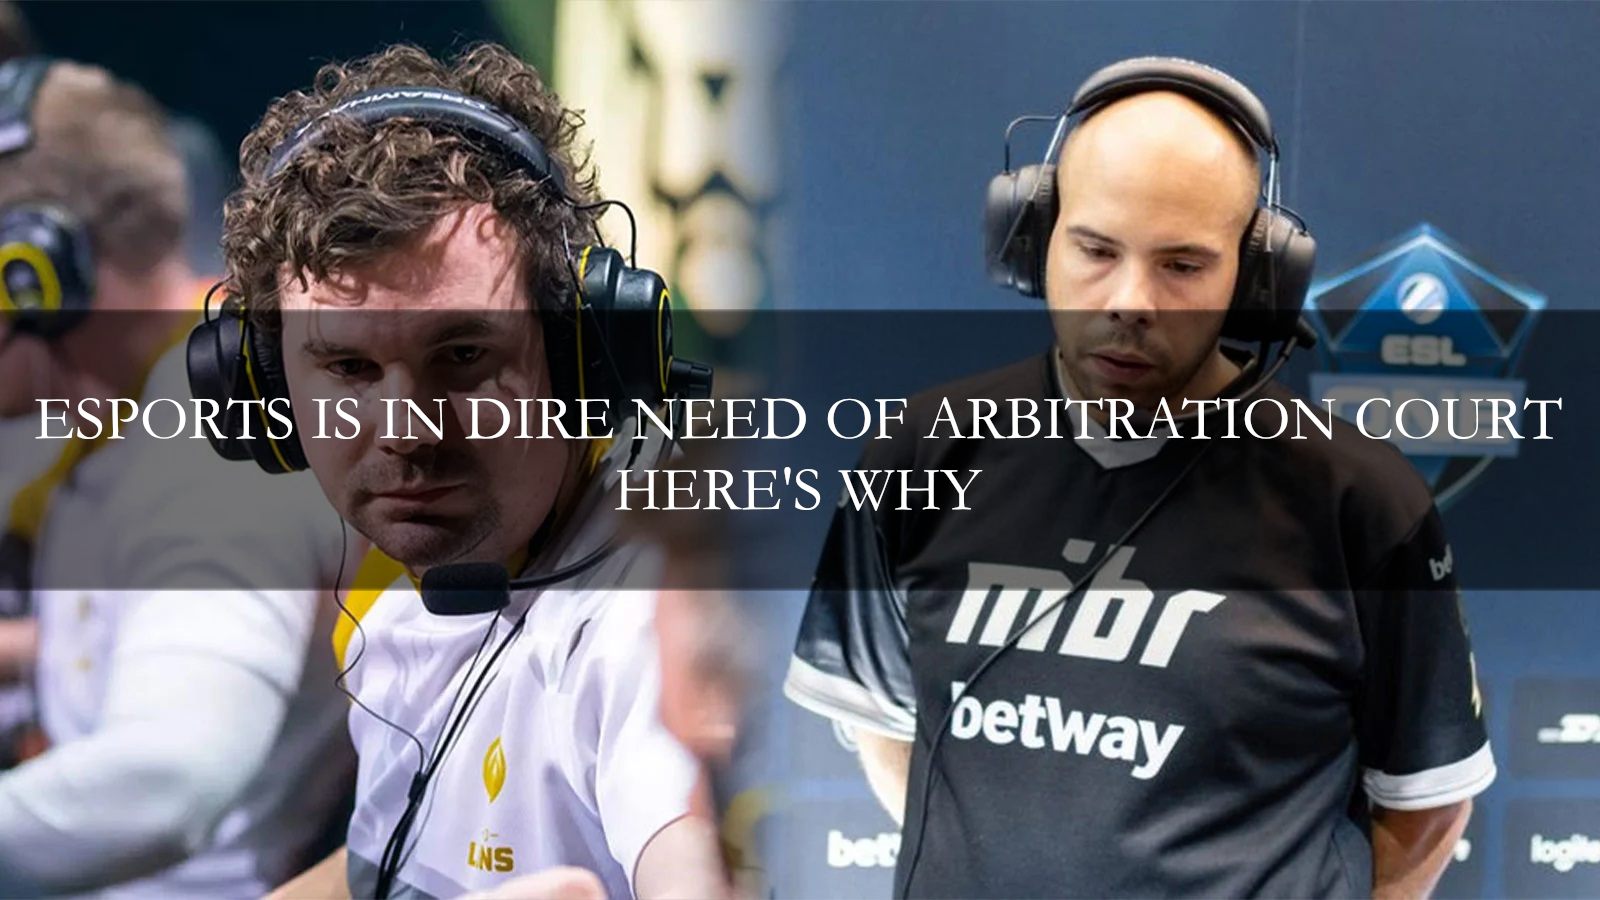 Esports is in a dire need of arbitration court – here’s why